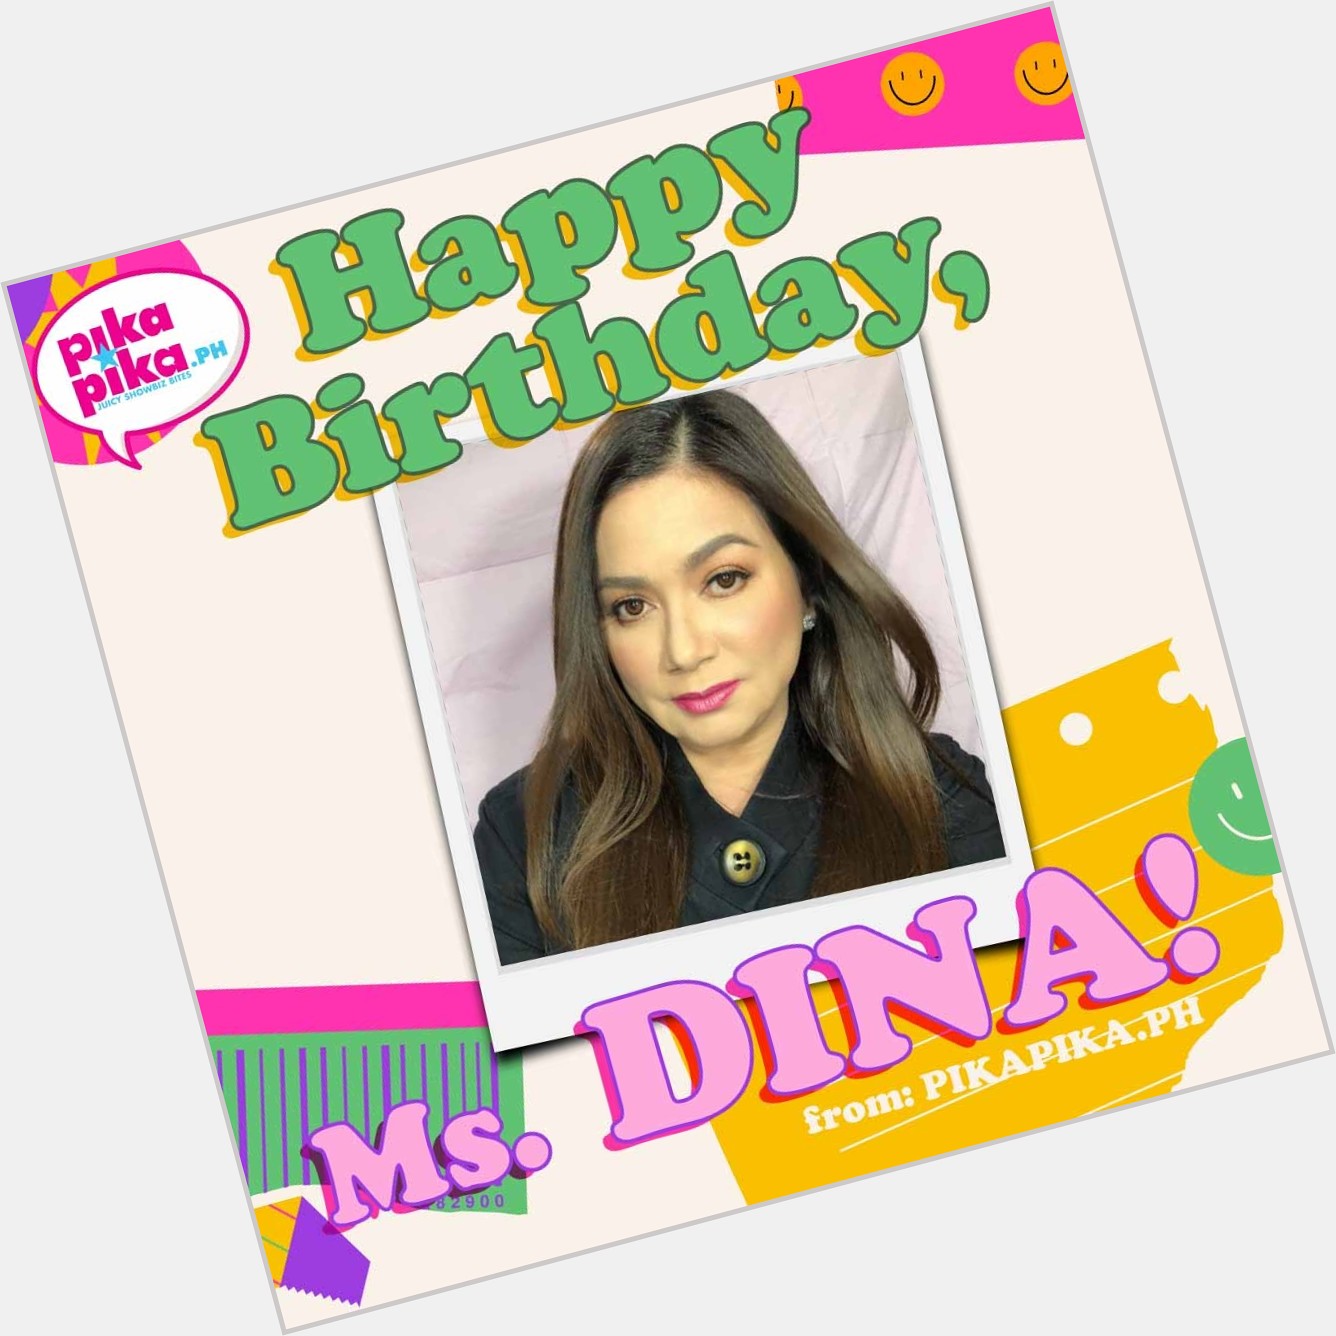 Happy birthday, Ms. Dina Bonnevie! May your special day be filled with love and cheers.    